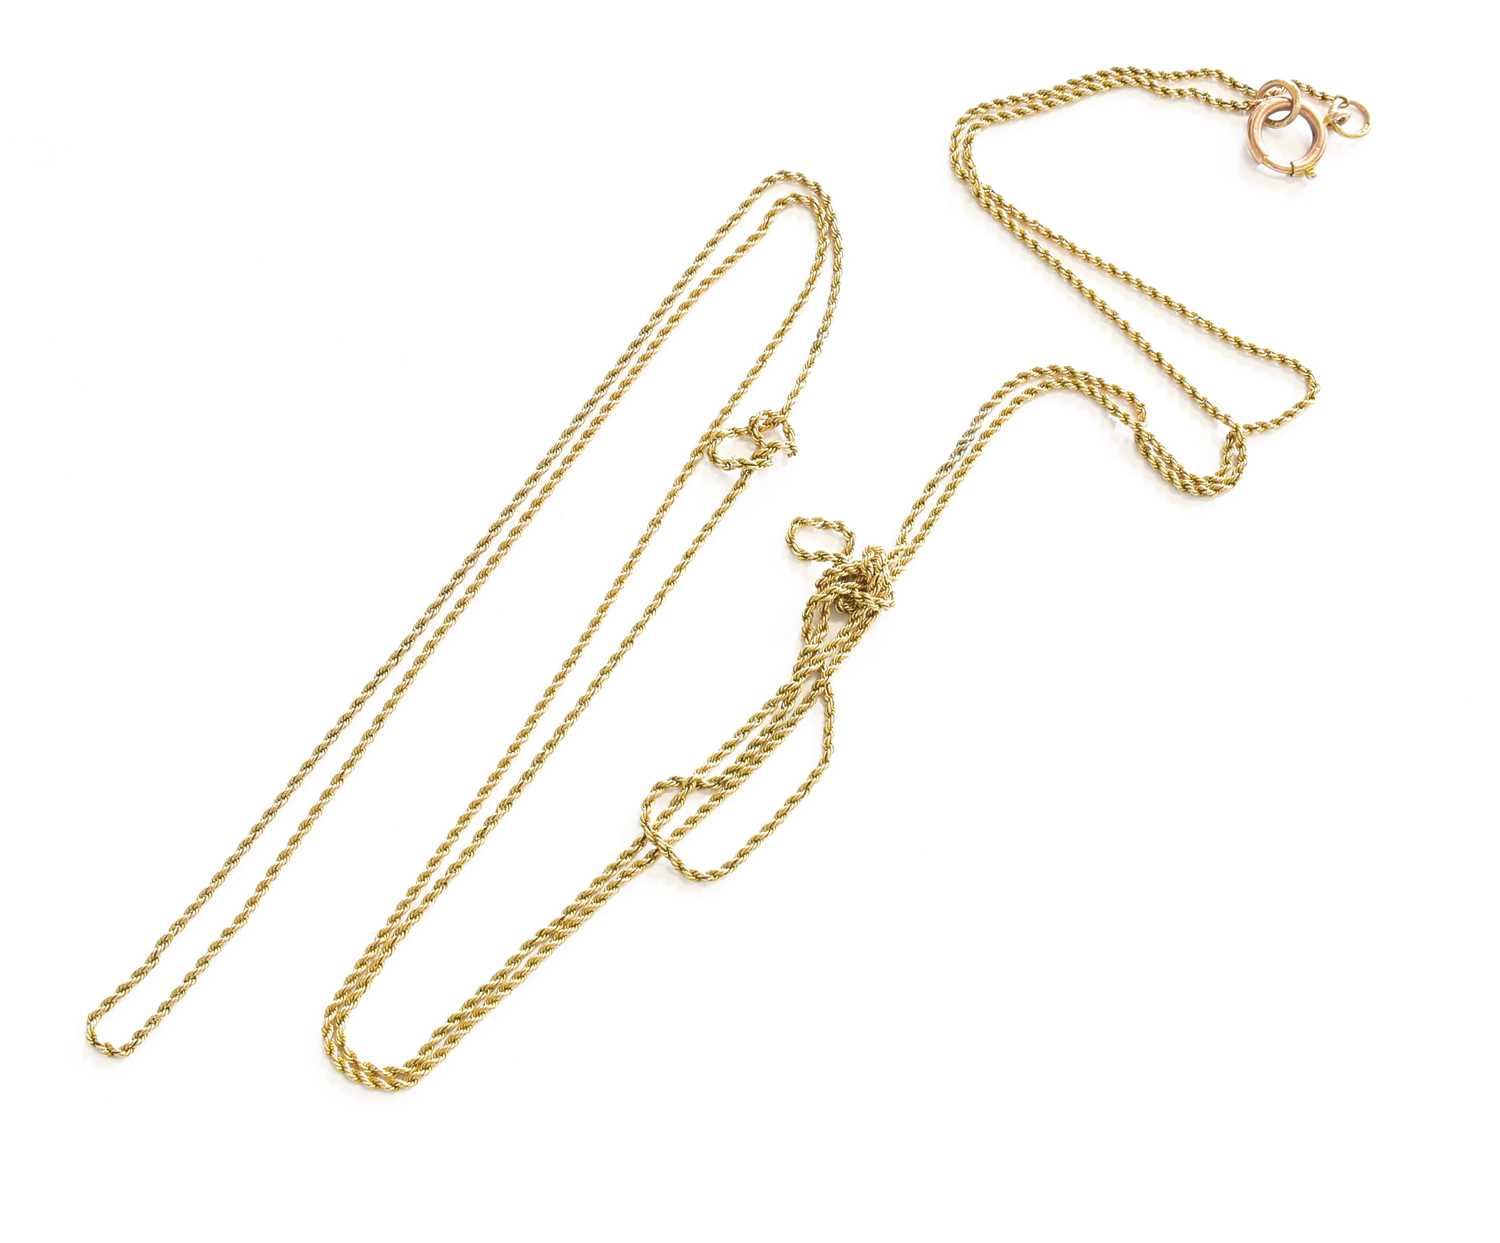 A Rope Twist Necklace, stamped '9CT', length 133cm Gross weight 11.1 grams.